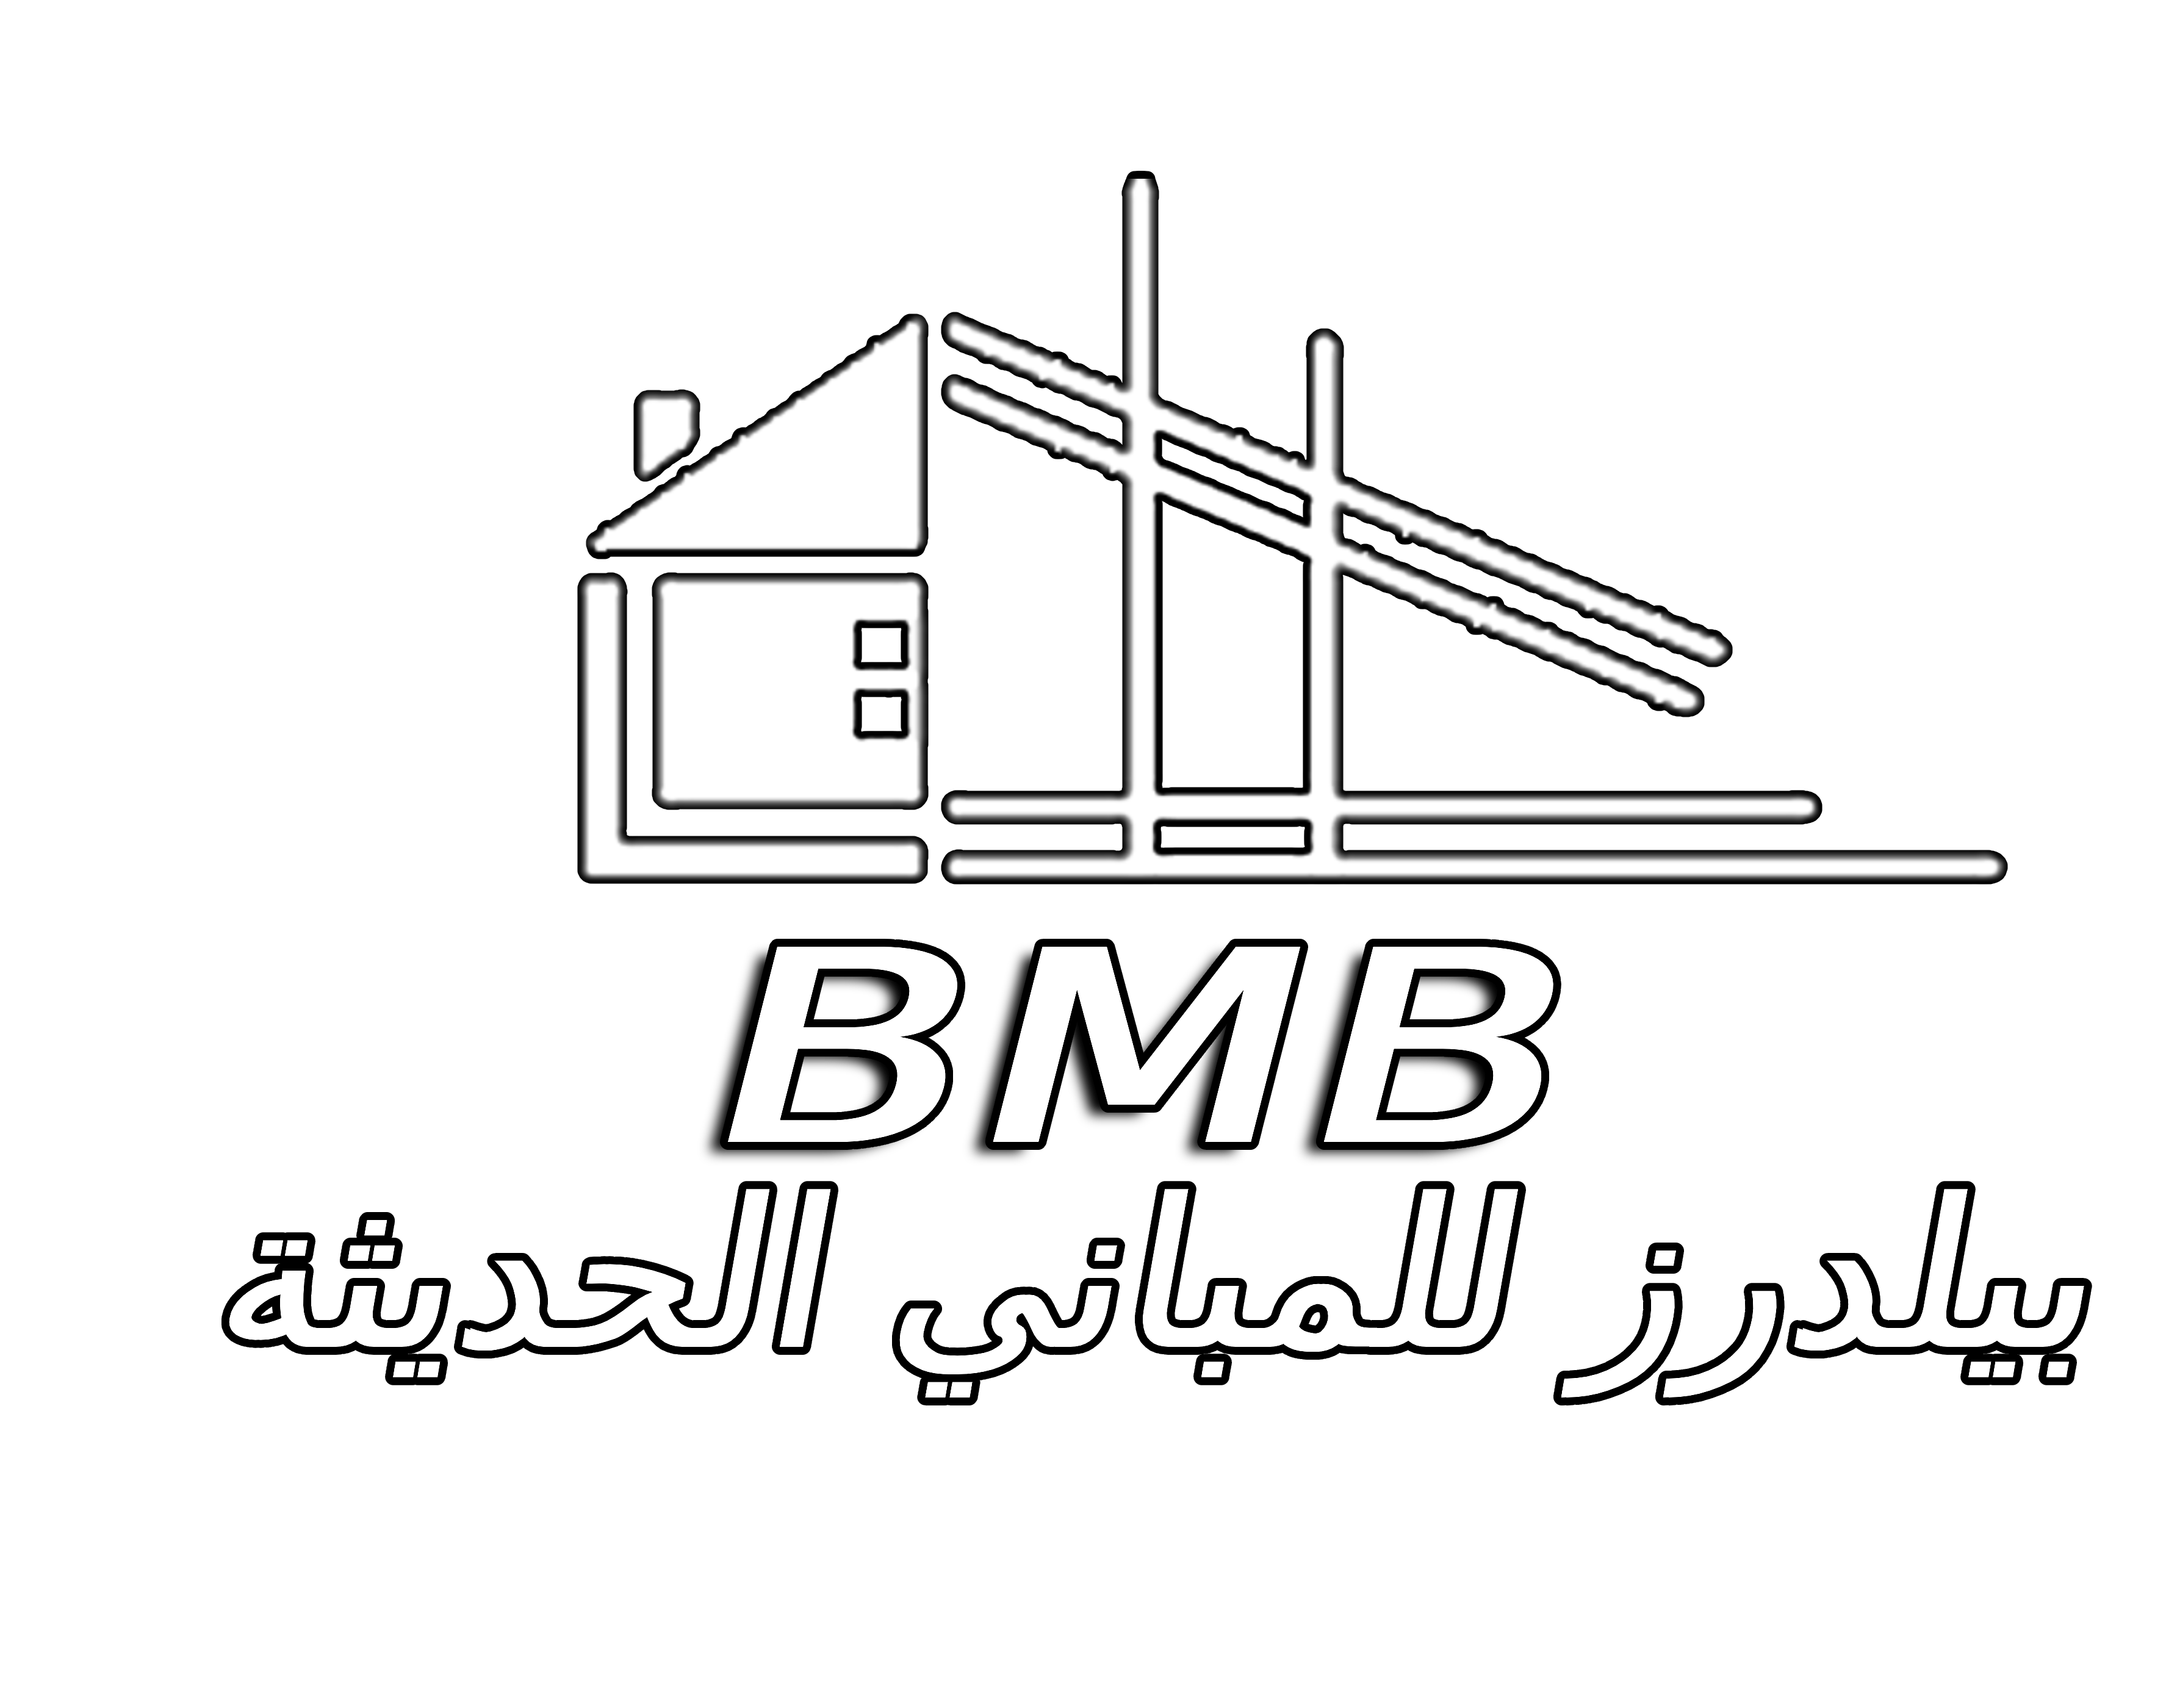 BMB (Builders for Modern Building)